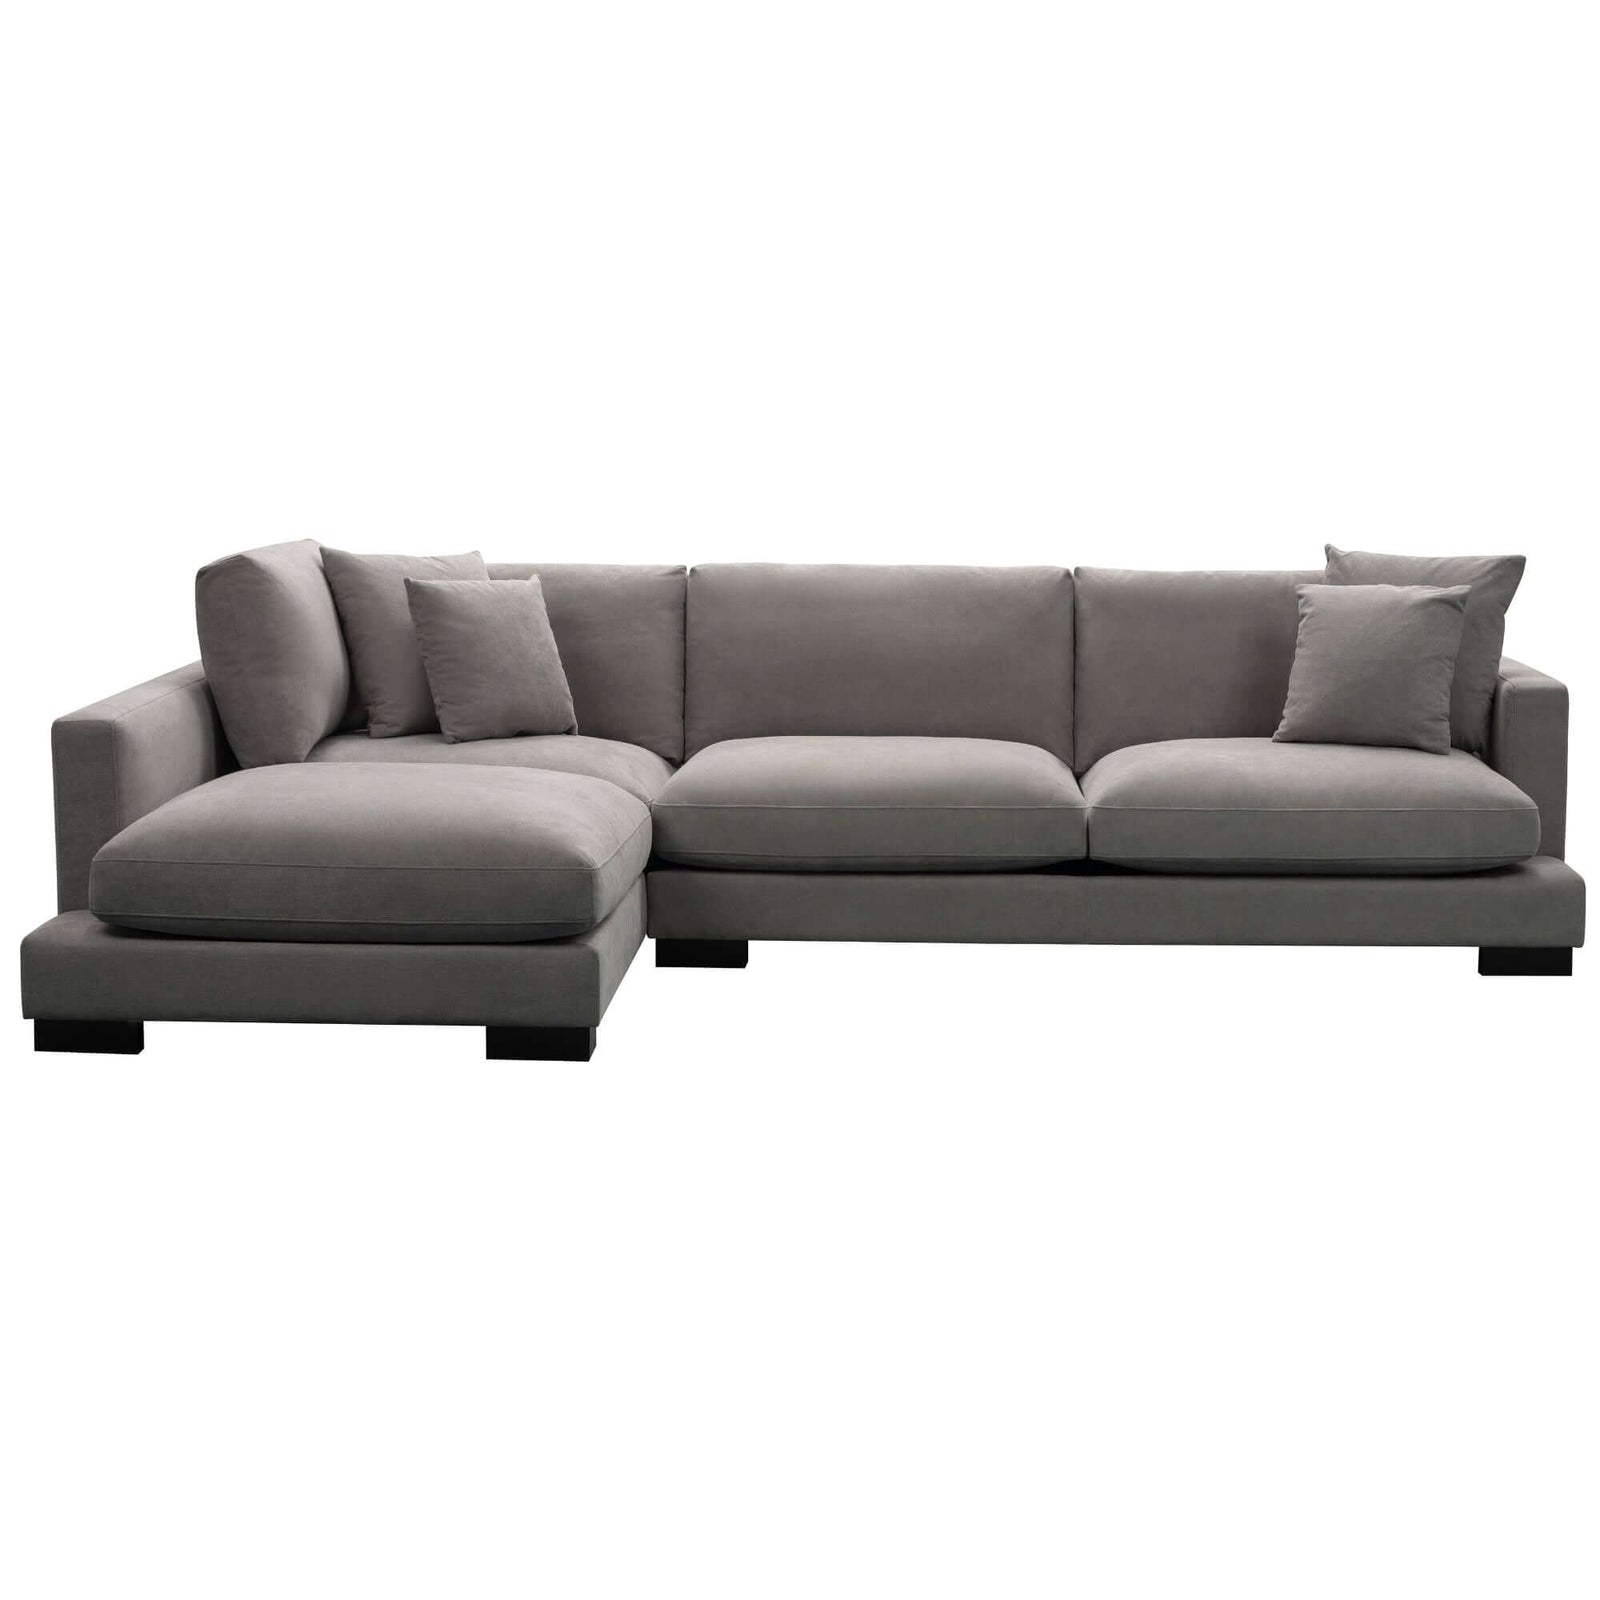 Royalty 3 Seater Sofa Fabric Uplholstered Left Chaise Lounge Couch - Grey-Upinteriors